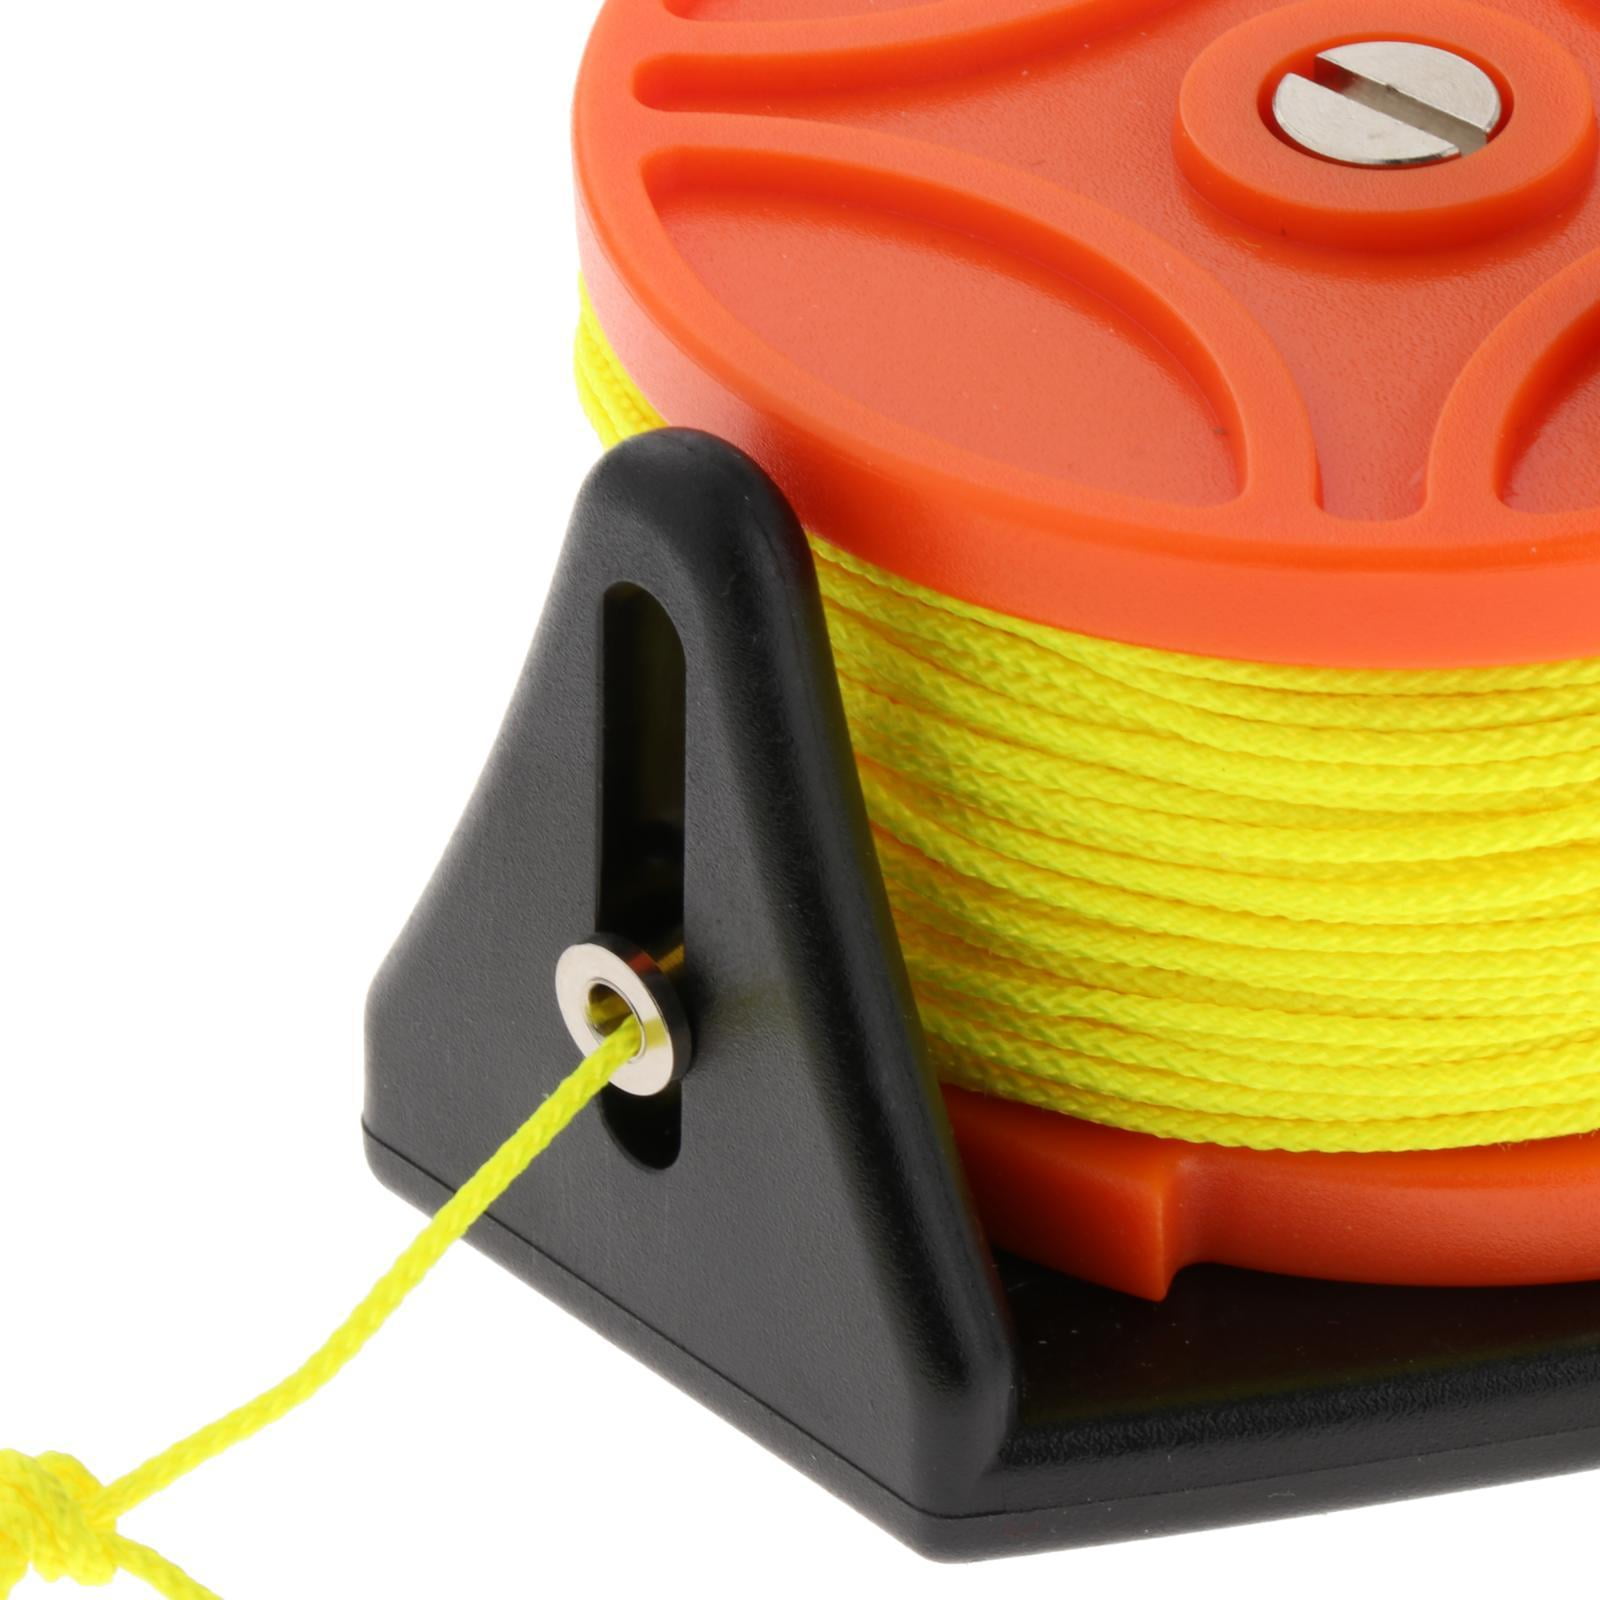 Funtasica 46m/150ft Scuba Diving Reel Line Polyester - High Visibility Scuba Dive Reel - Deep Sea, Wreck and Cave Diving, Orange